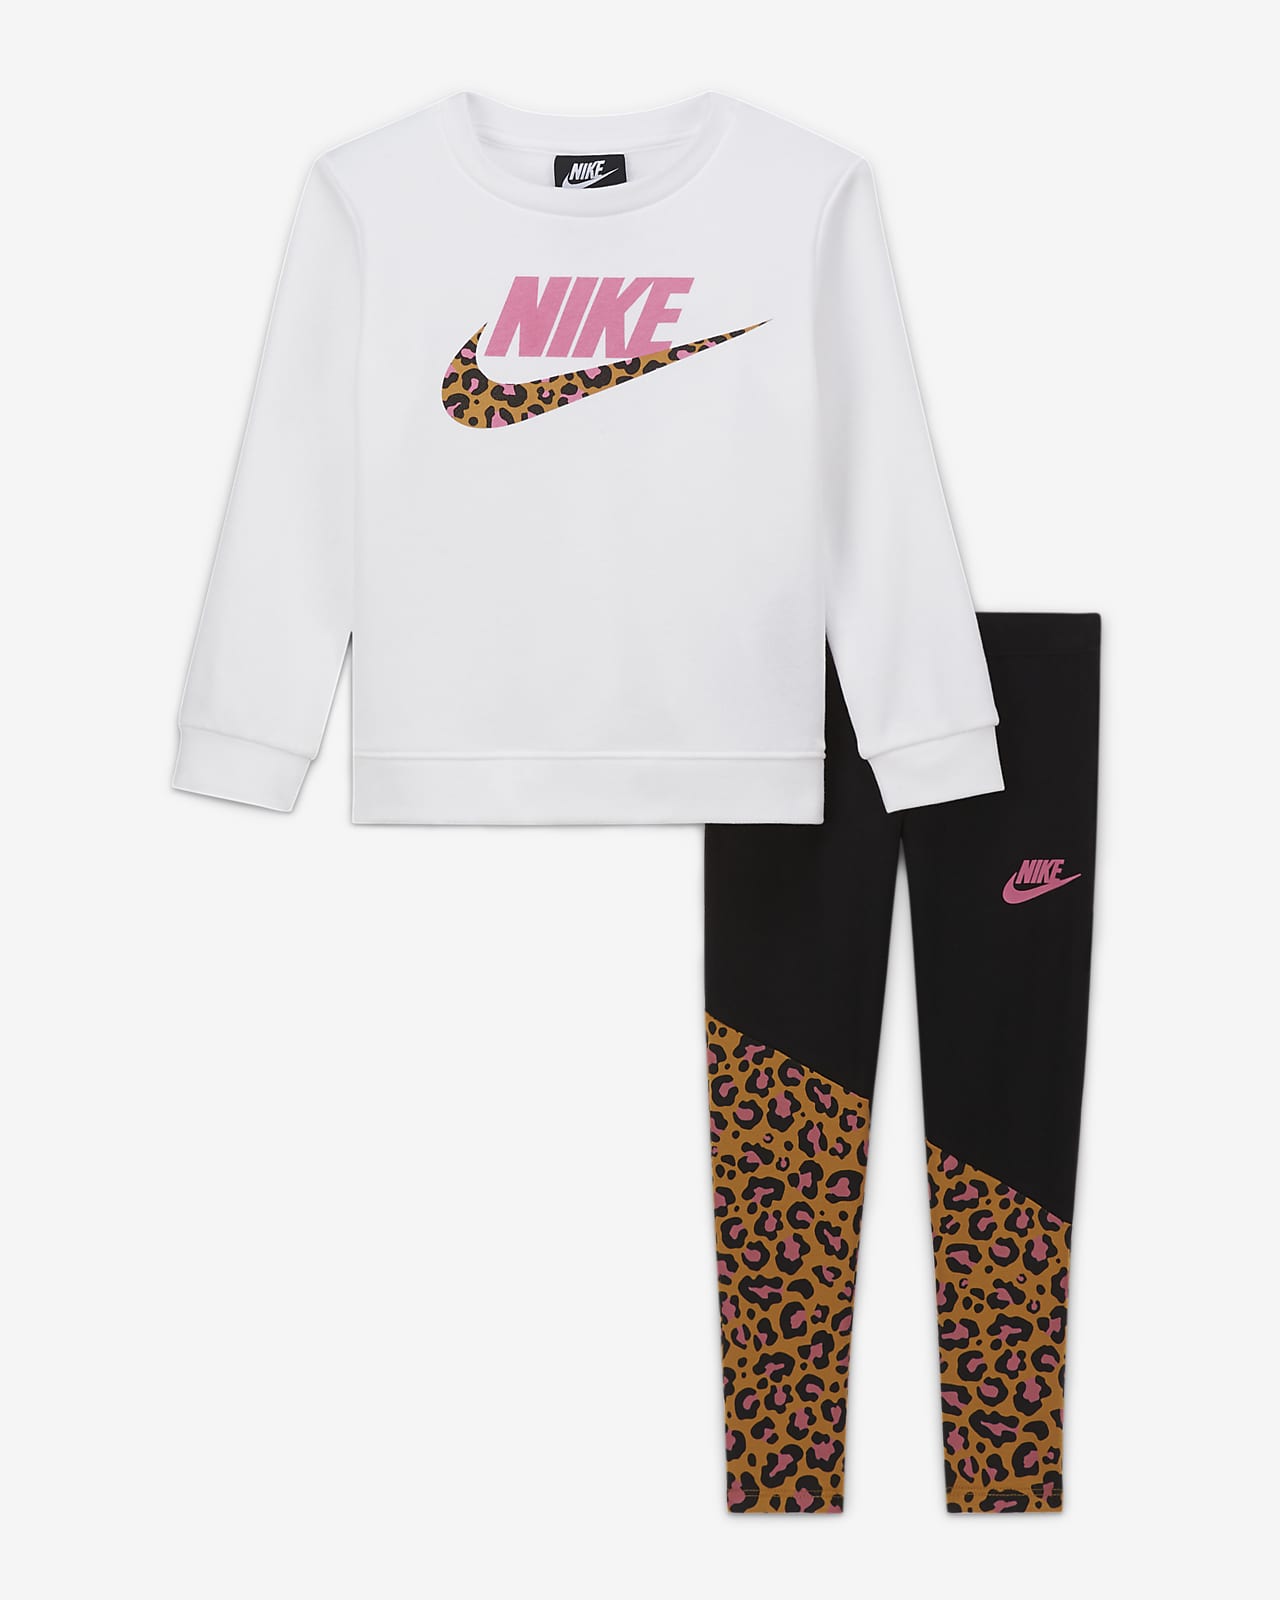 https://static.nike.com/a/images/t_PDP_1280_v1/f_auto,q_auto:eco/49d91810-f048-4666-bffc-be227db979a0/toddler-crew-and-leggings-set-7GWPcw.png